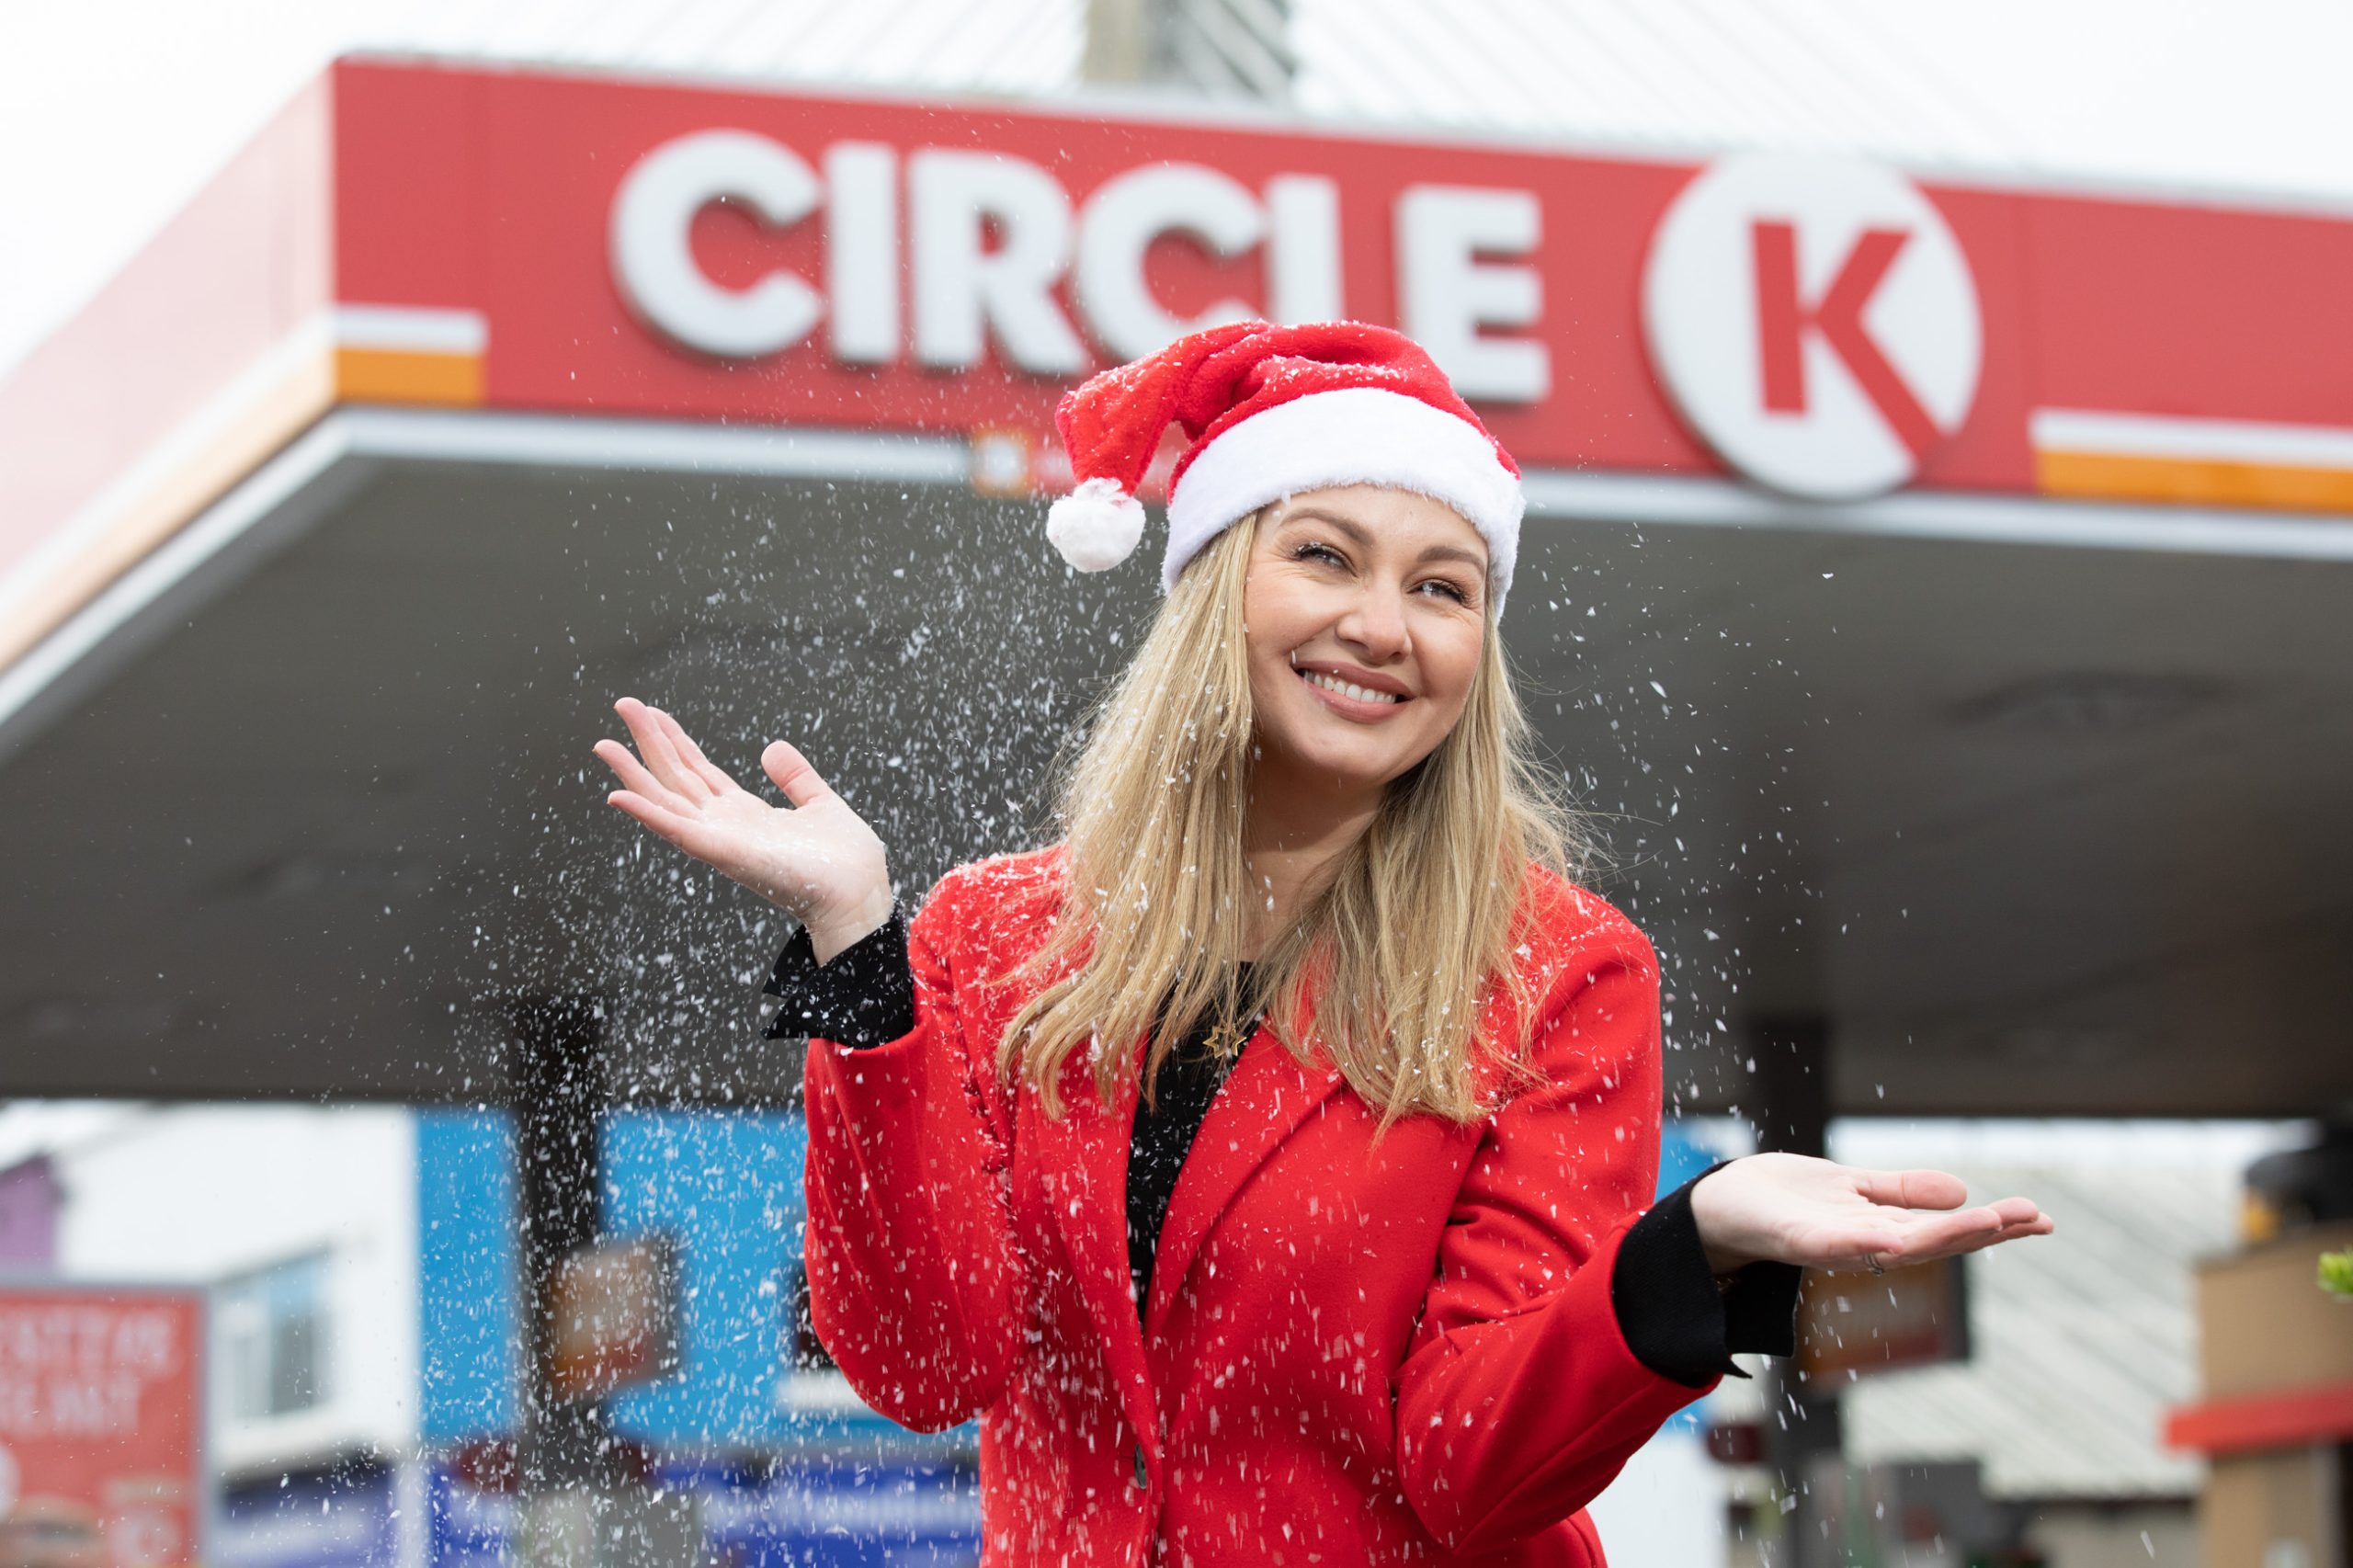 39% of motorists like to visit a car wash in their festive build-up: Circle K